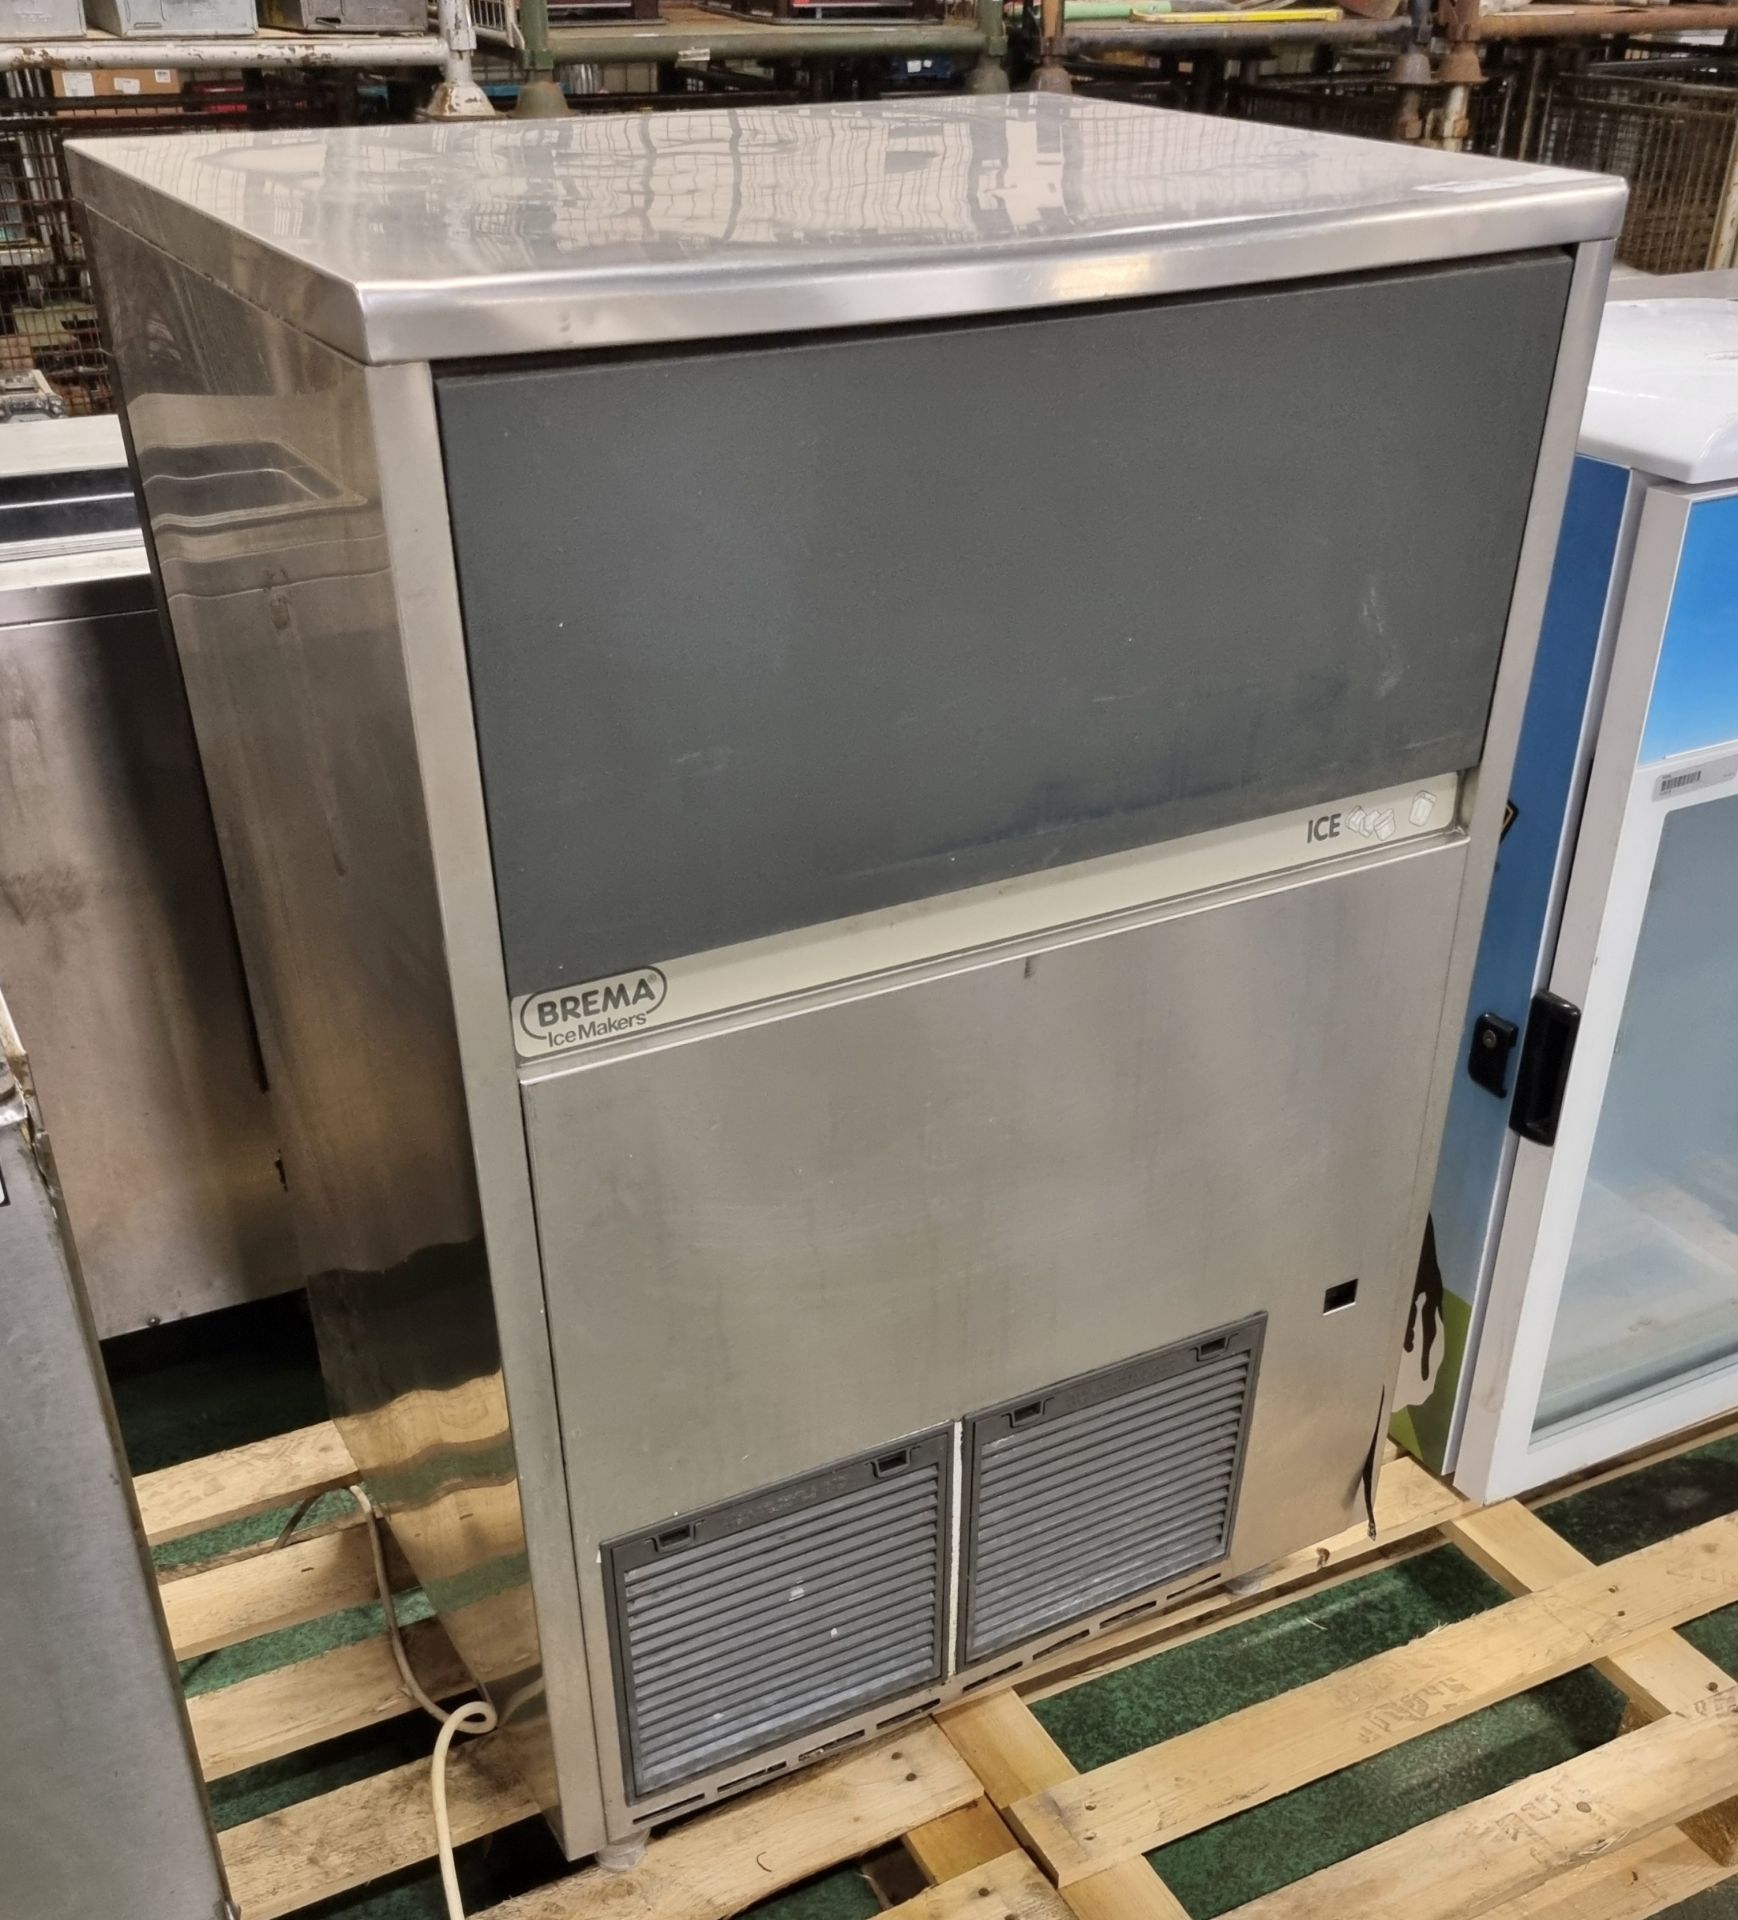 Brema CB955A-Q stainless steel ice maker - W 740 x D 600 x H 1130mm - Image 3 of 6